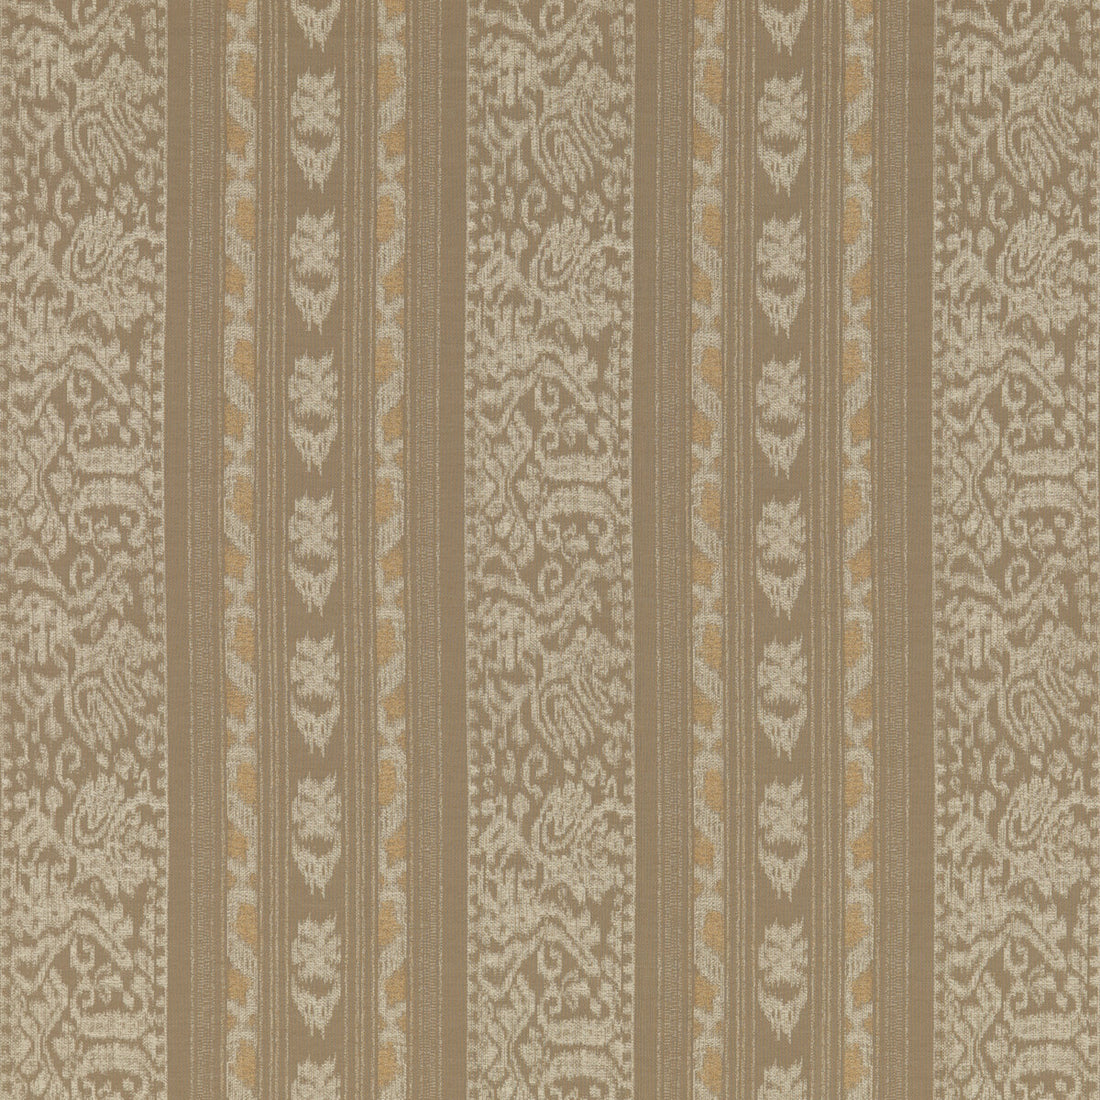 Senara fabric in sand color - pattern BF10882.2.0 - by G P &amp; J Baker in the Chifu collection